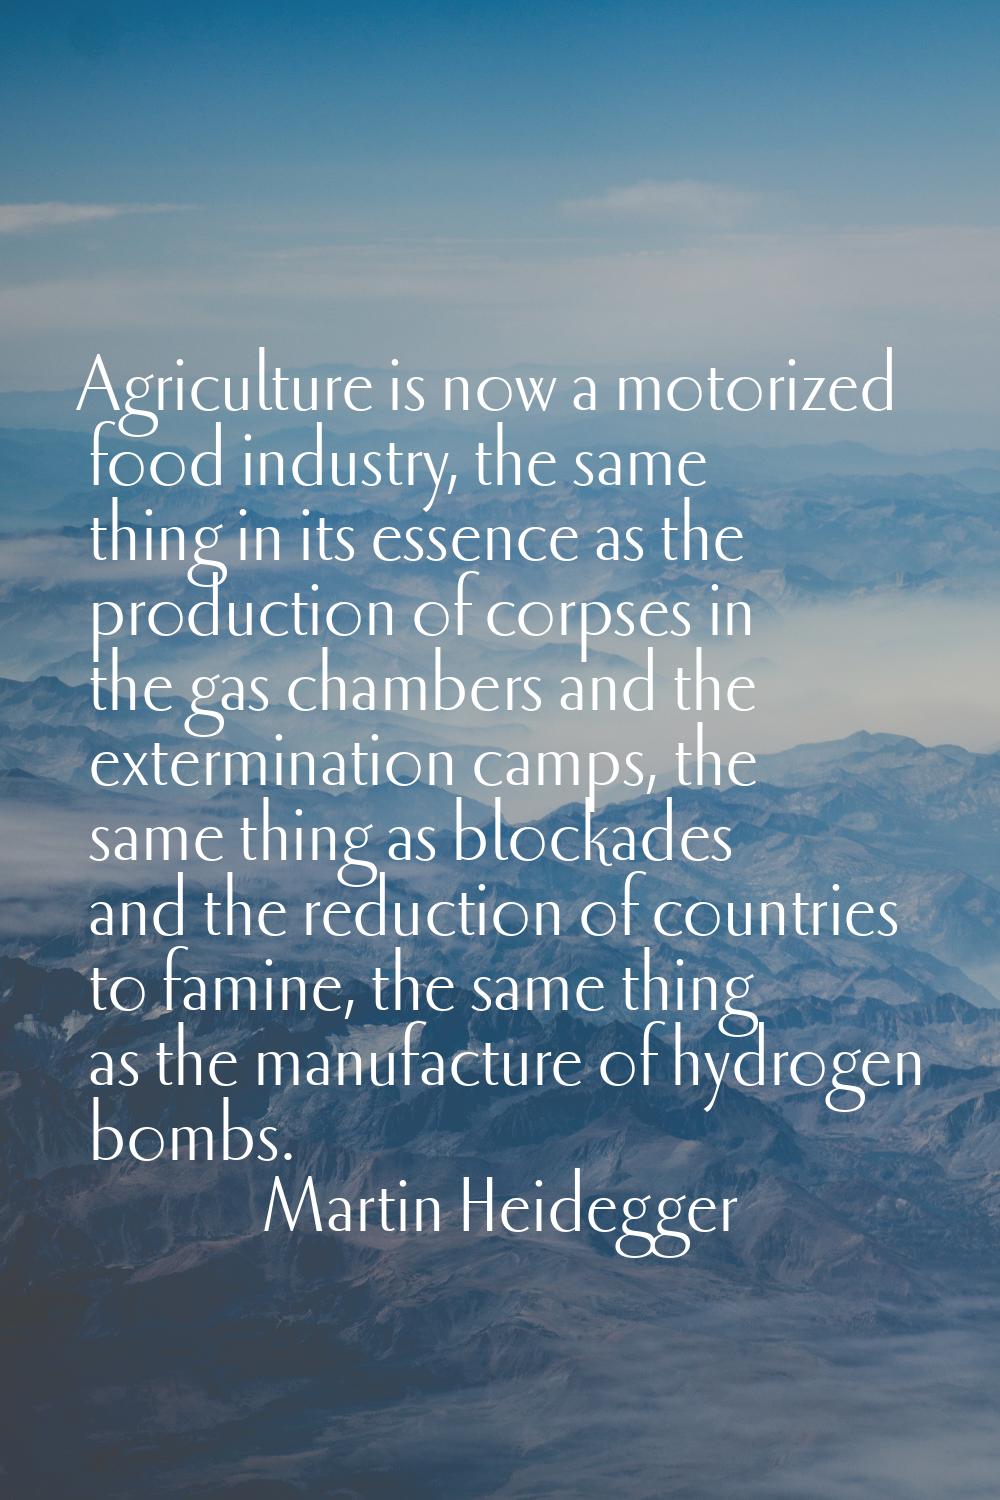 Agriculture is now a motorized food industry, the same thing in its essence as the production of co